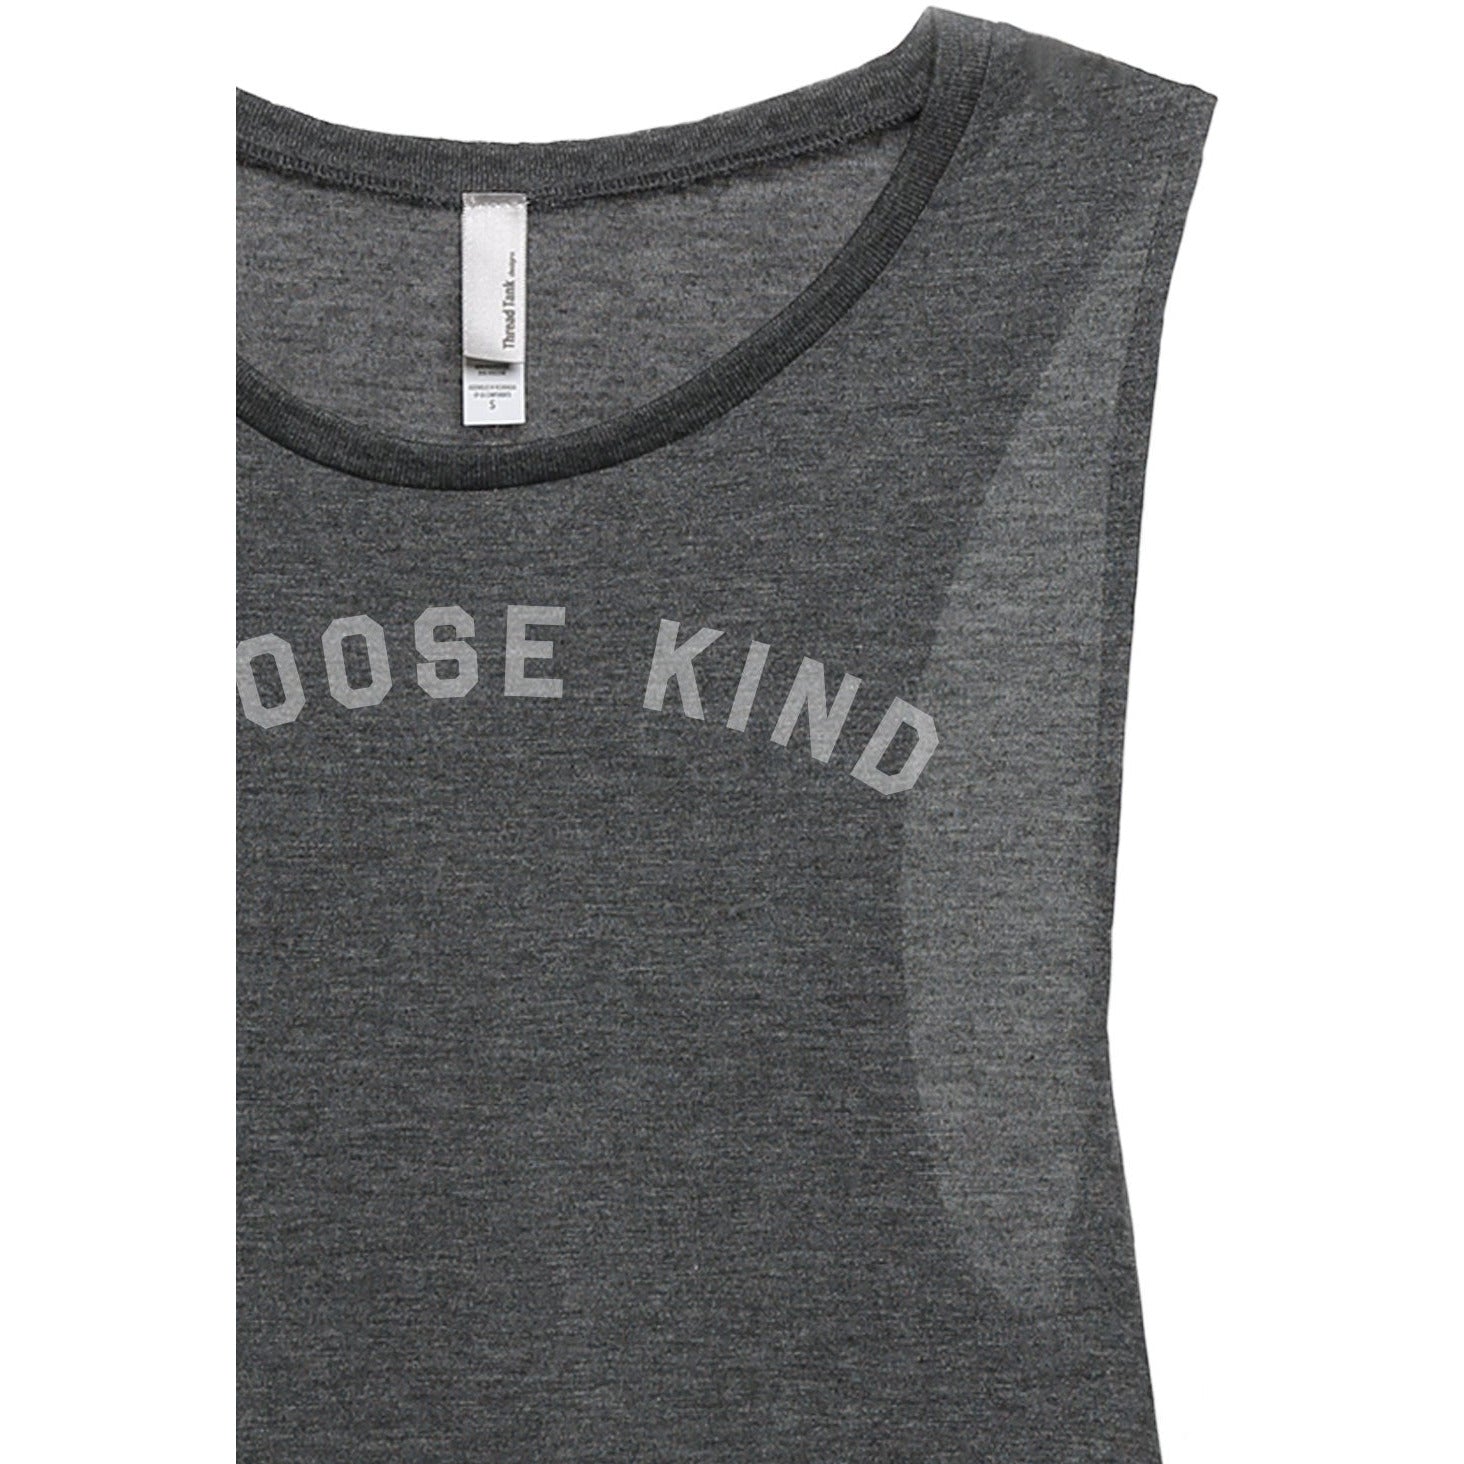 Choose Kind Women's Relaxed Muscle Tank Tee Charcoal Closeup Details
